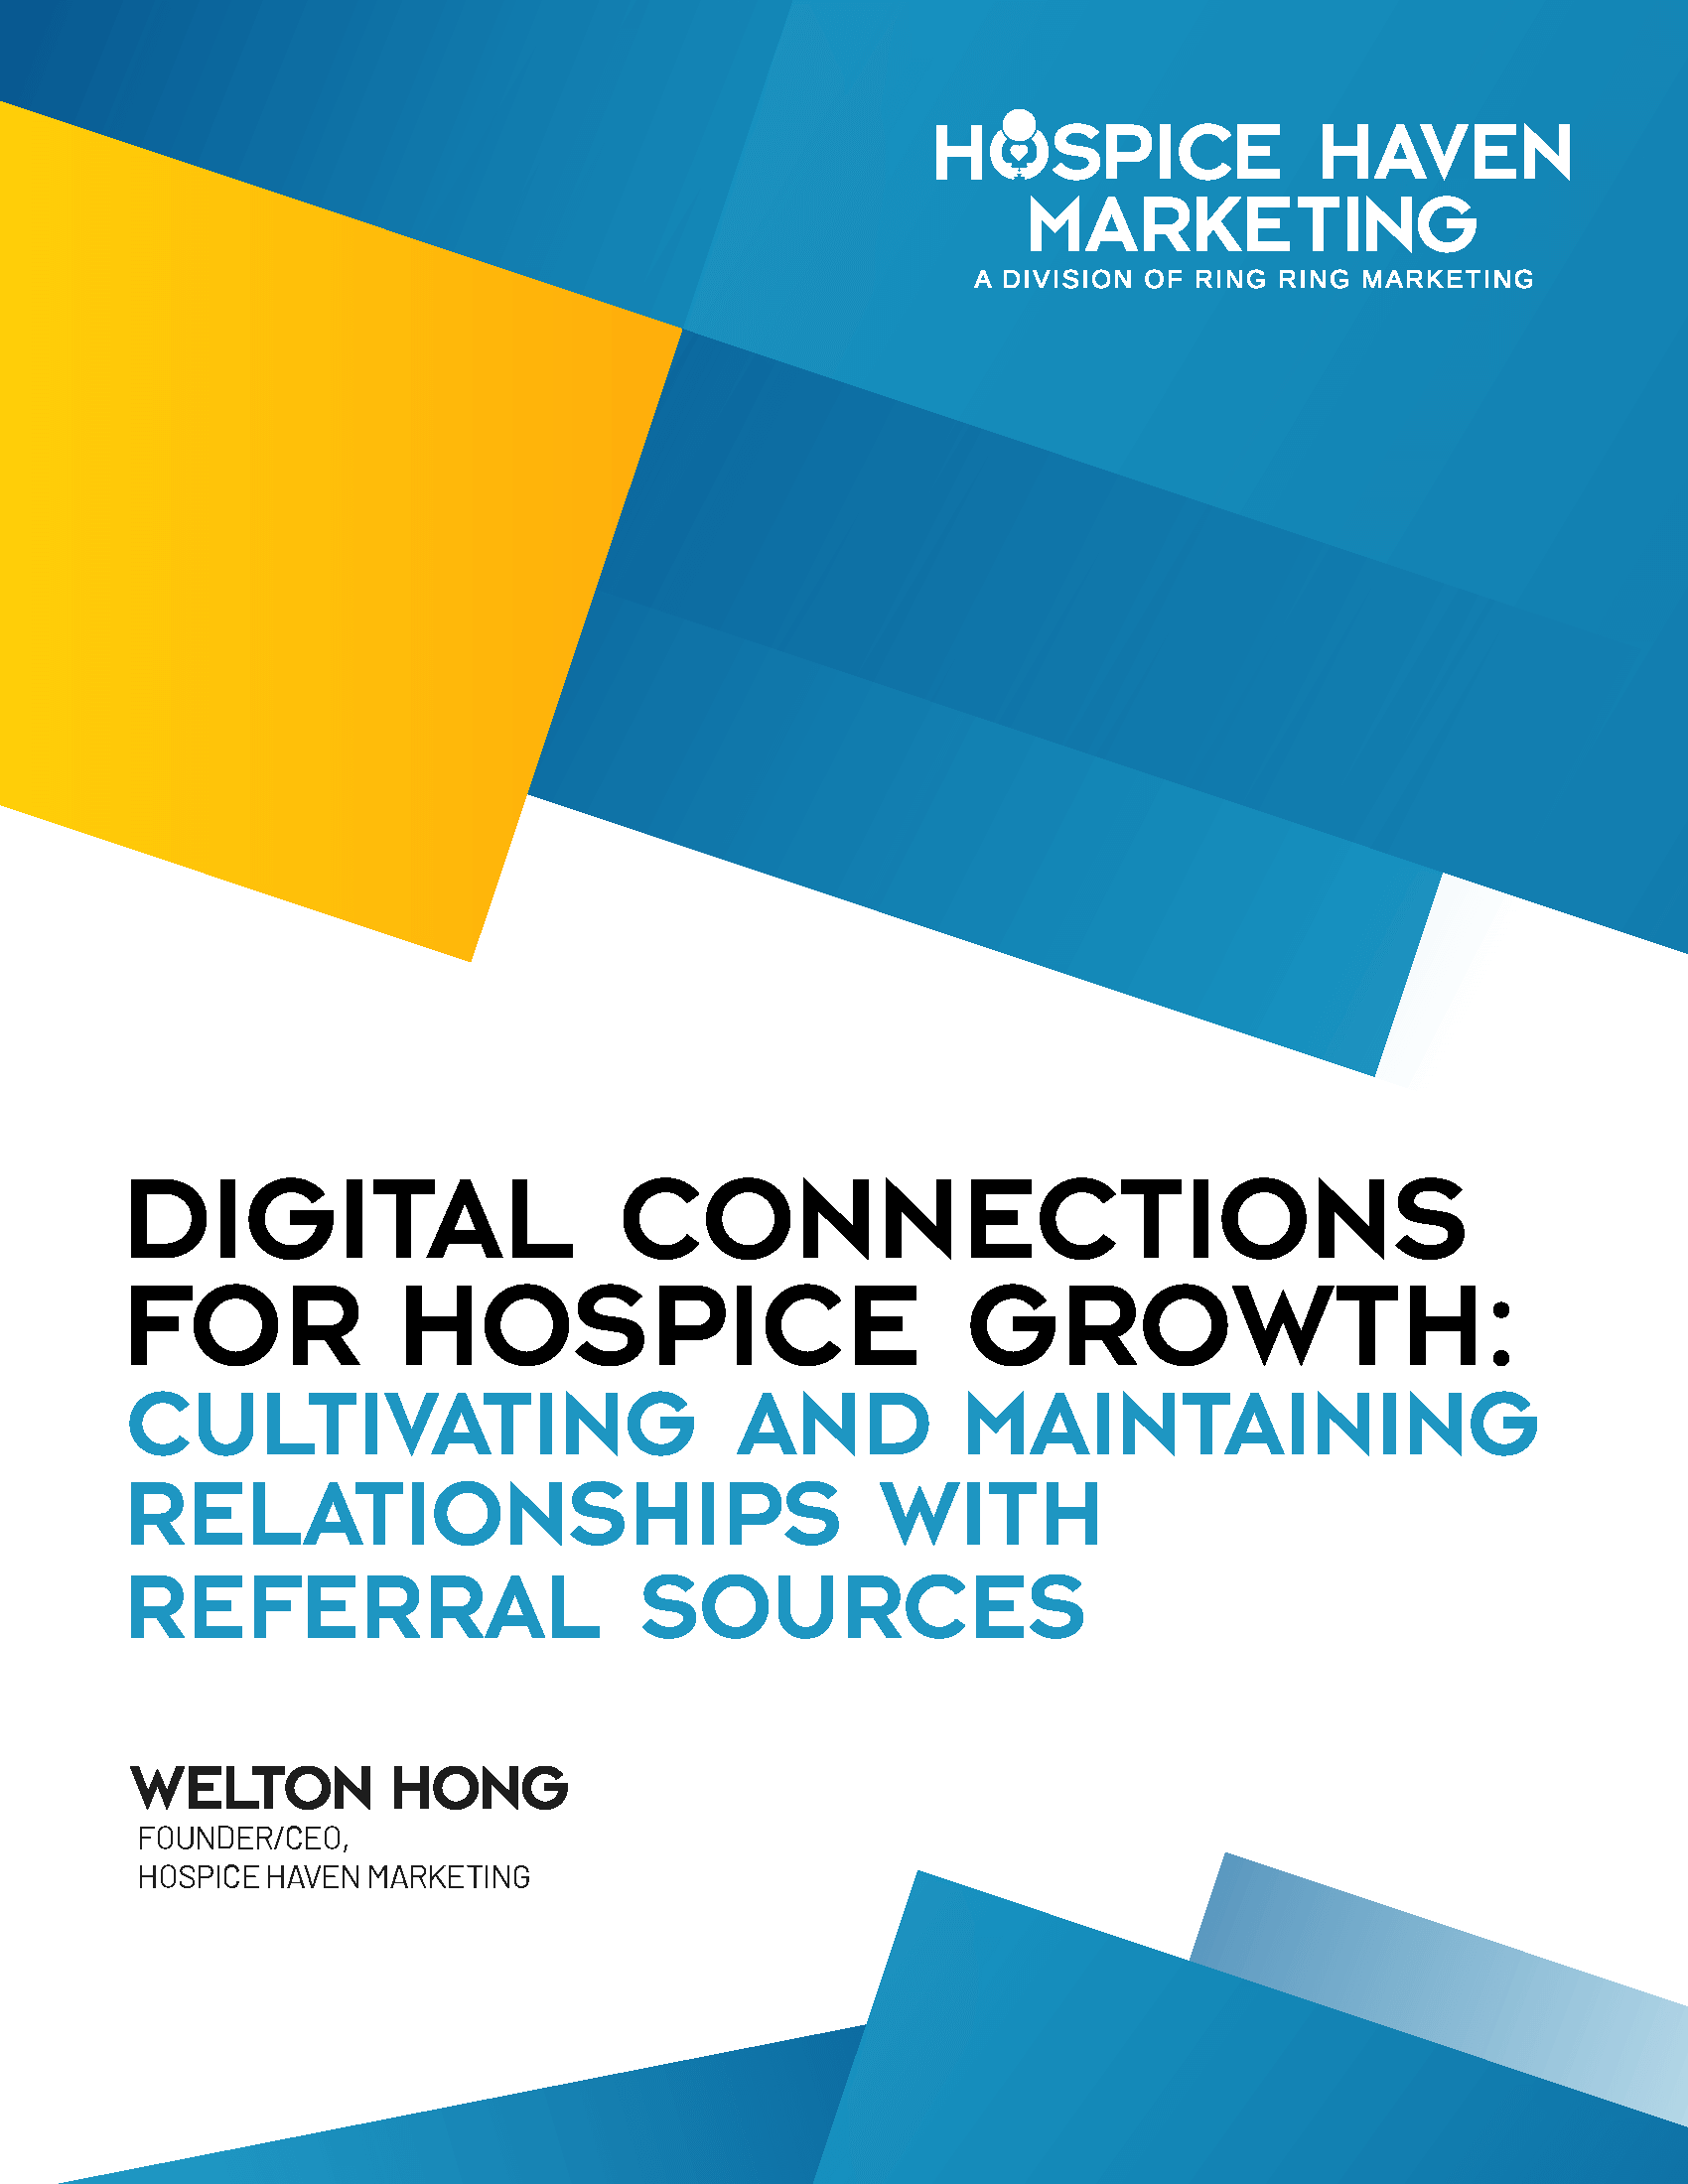 Unlock the Secrets to Hospice Growth: Get Your FREE Guide Now!